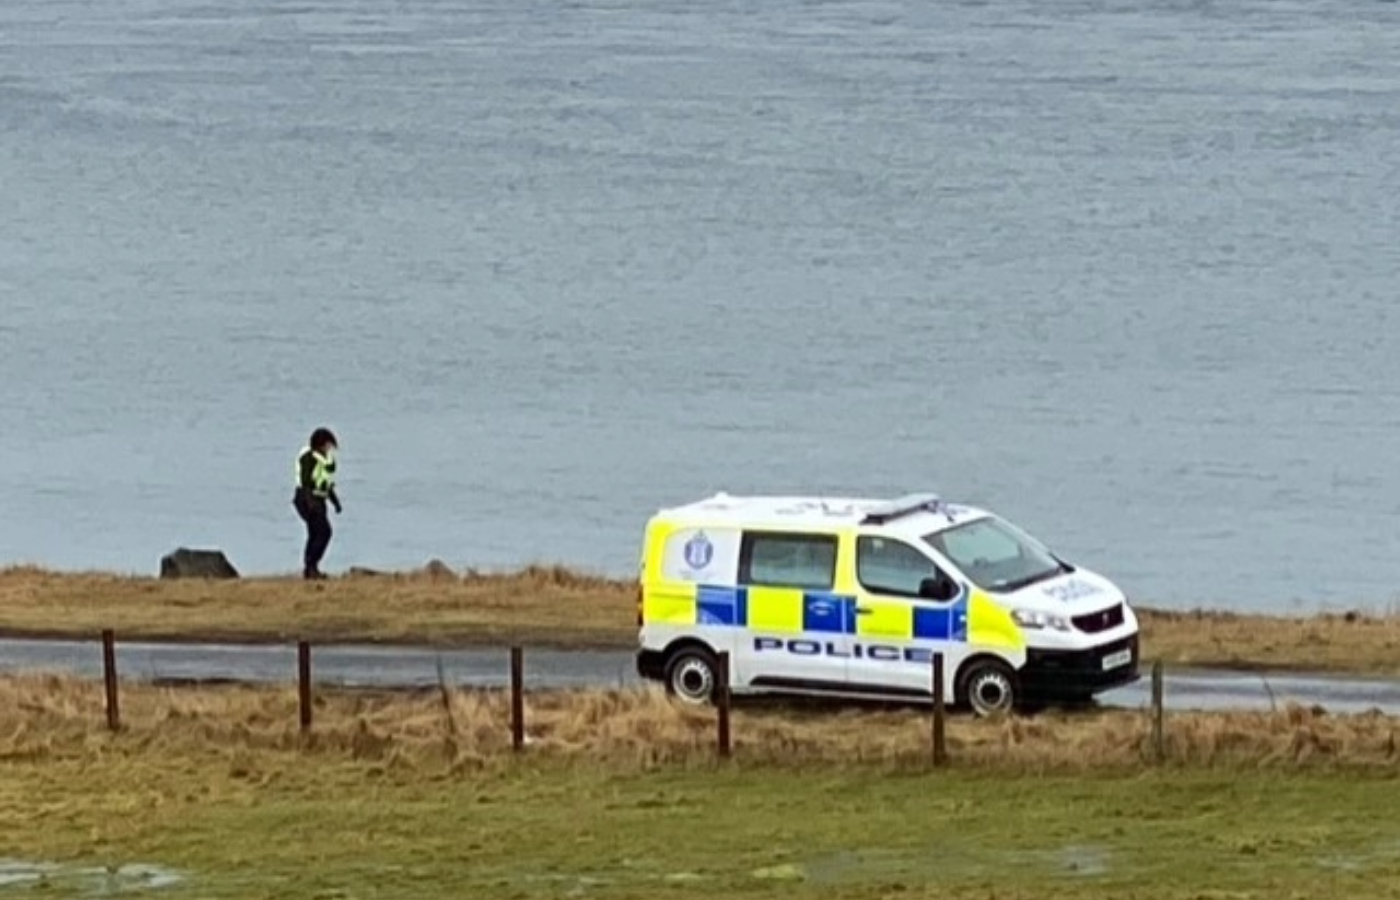 A large police presence remained in the area on the island. Photo: STV News.